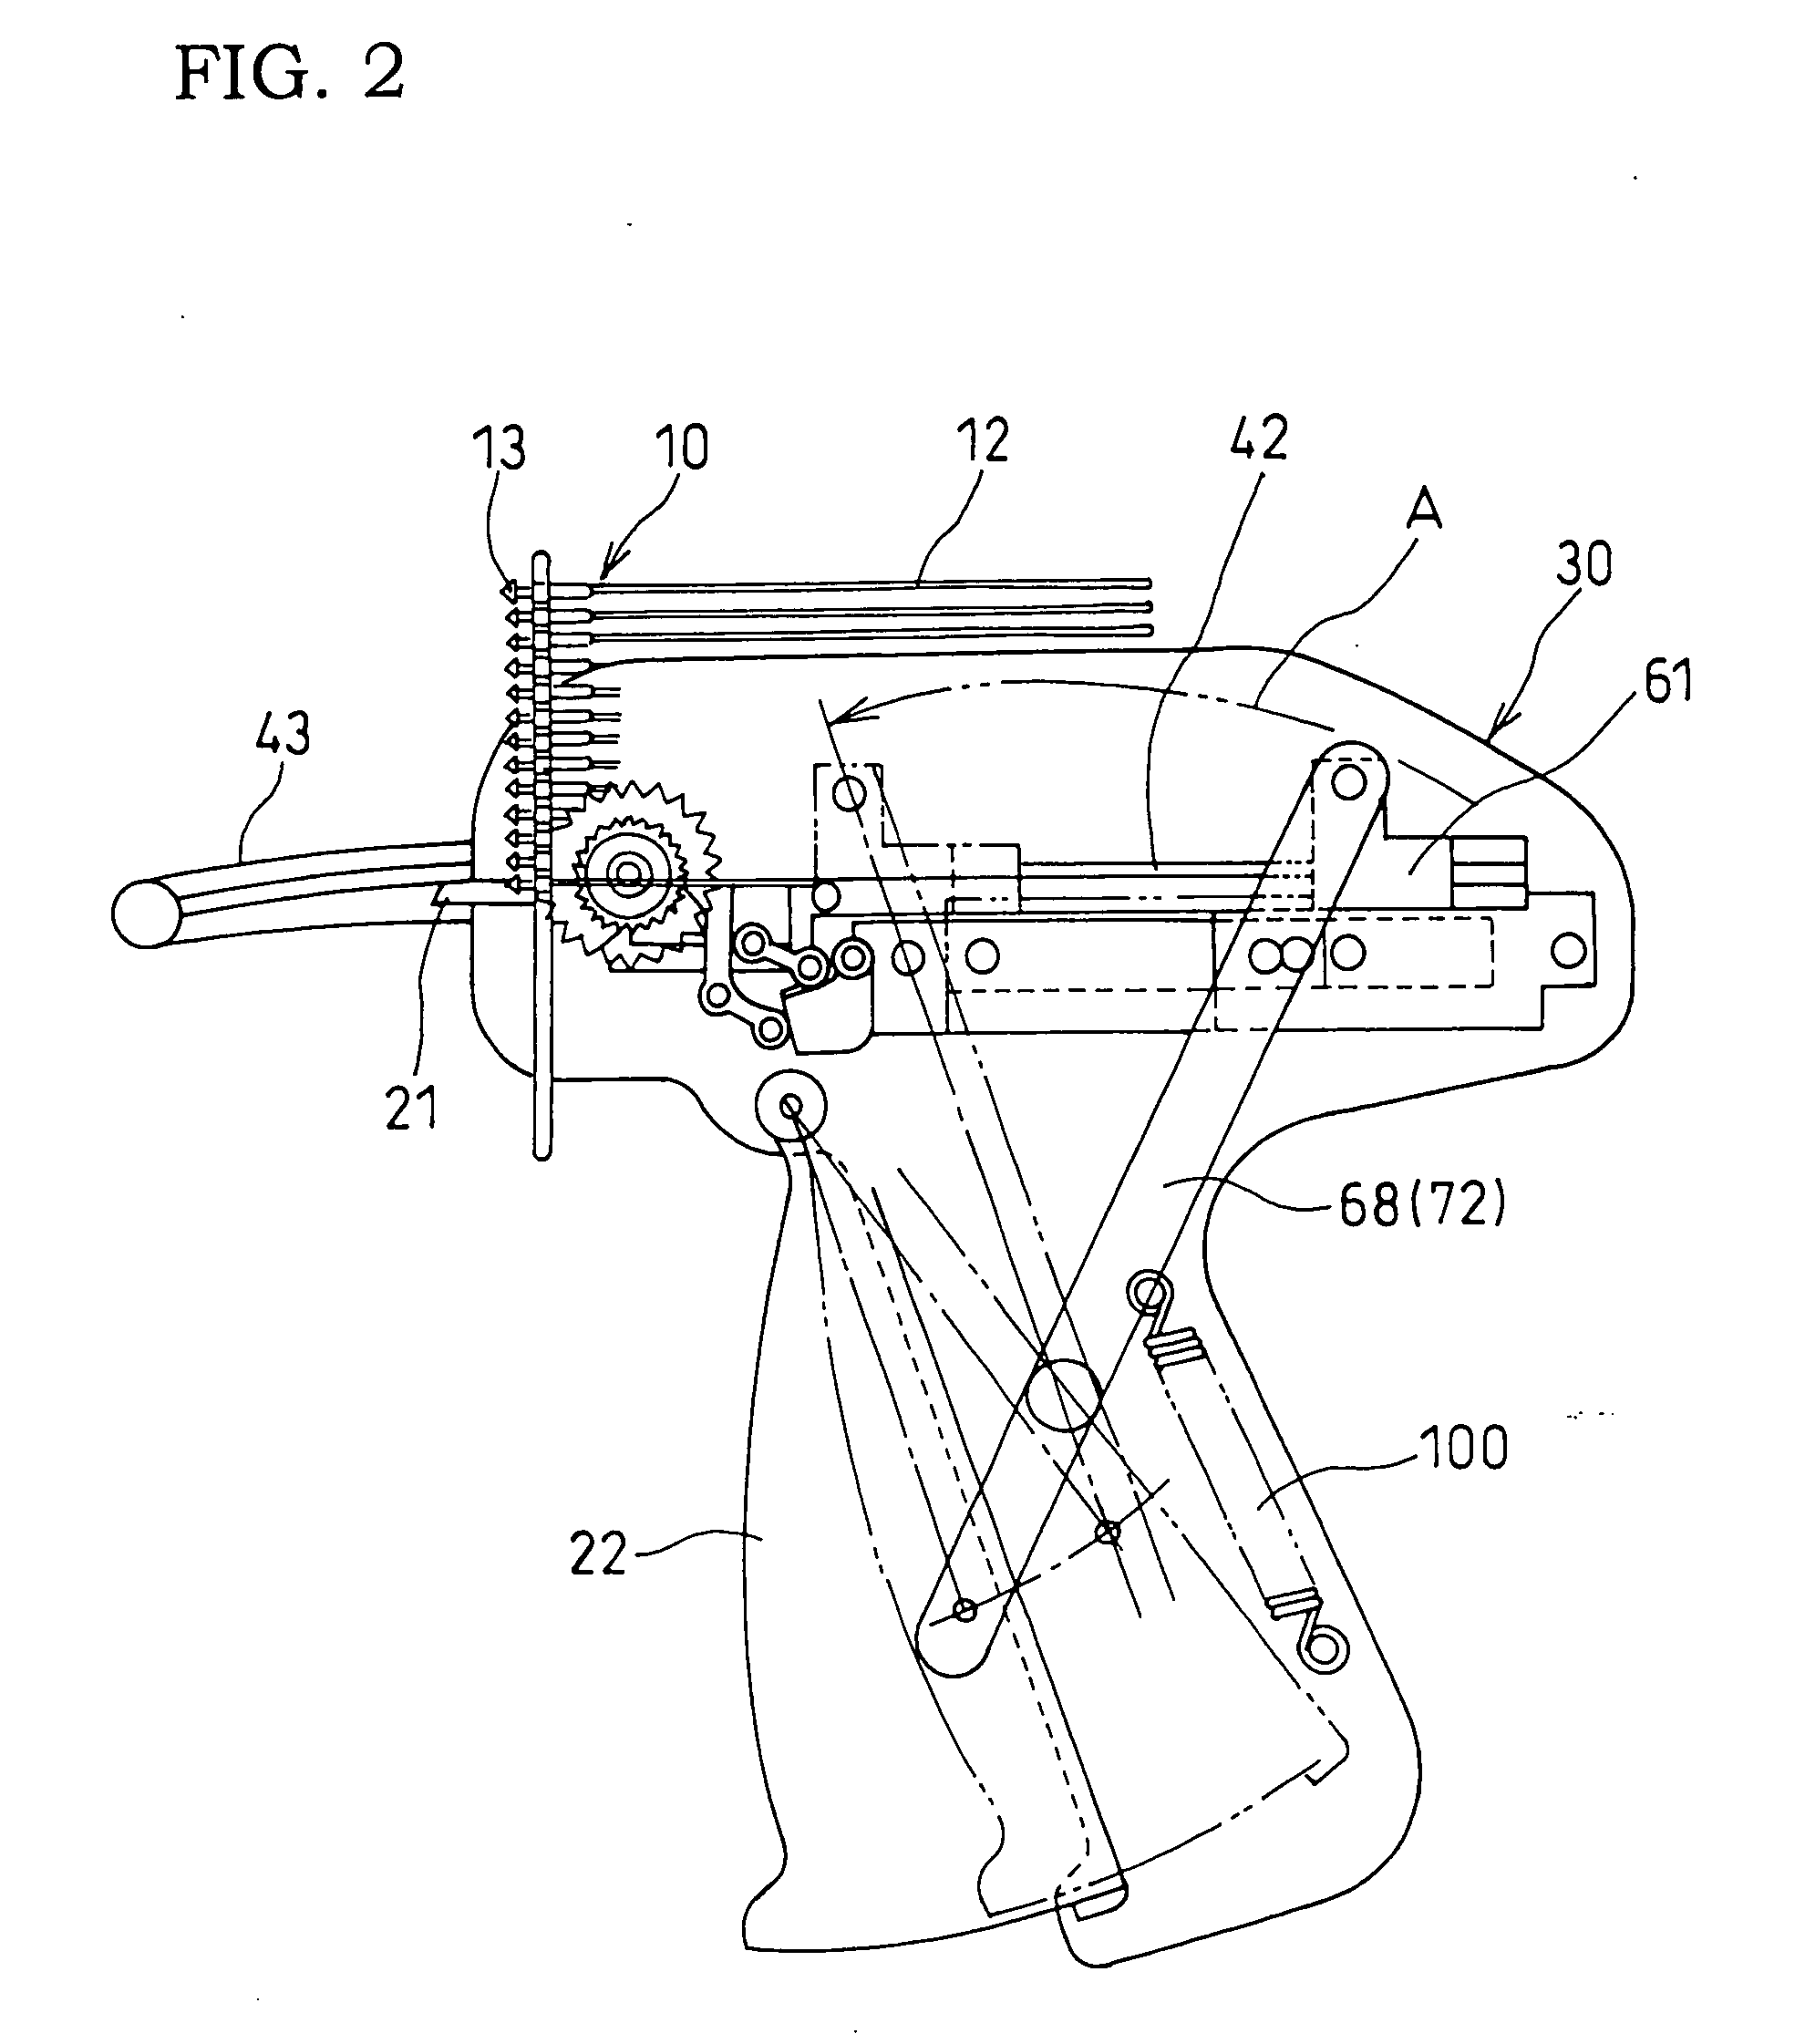 Loop pin connecting device